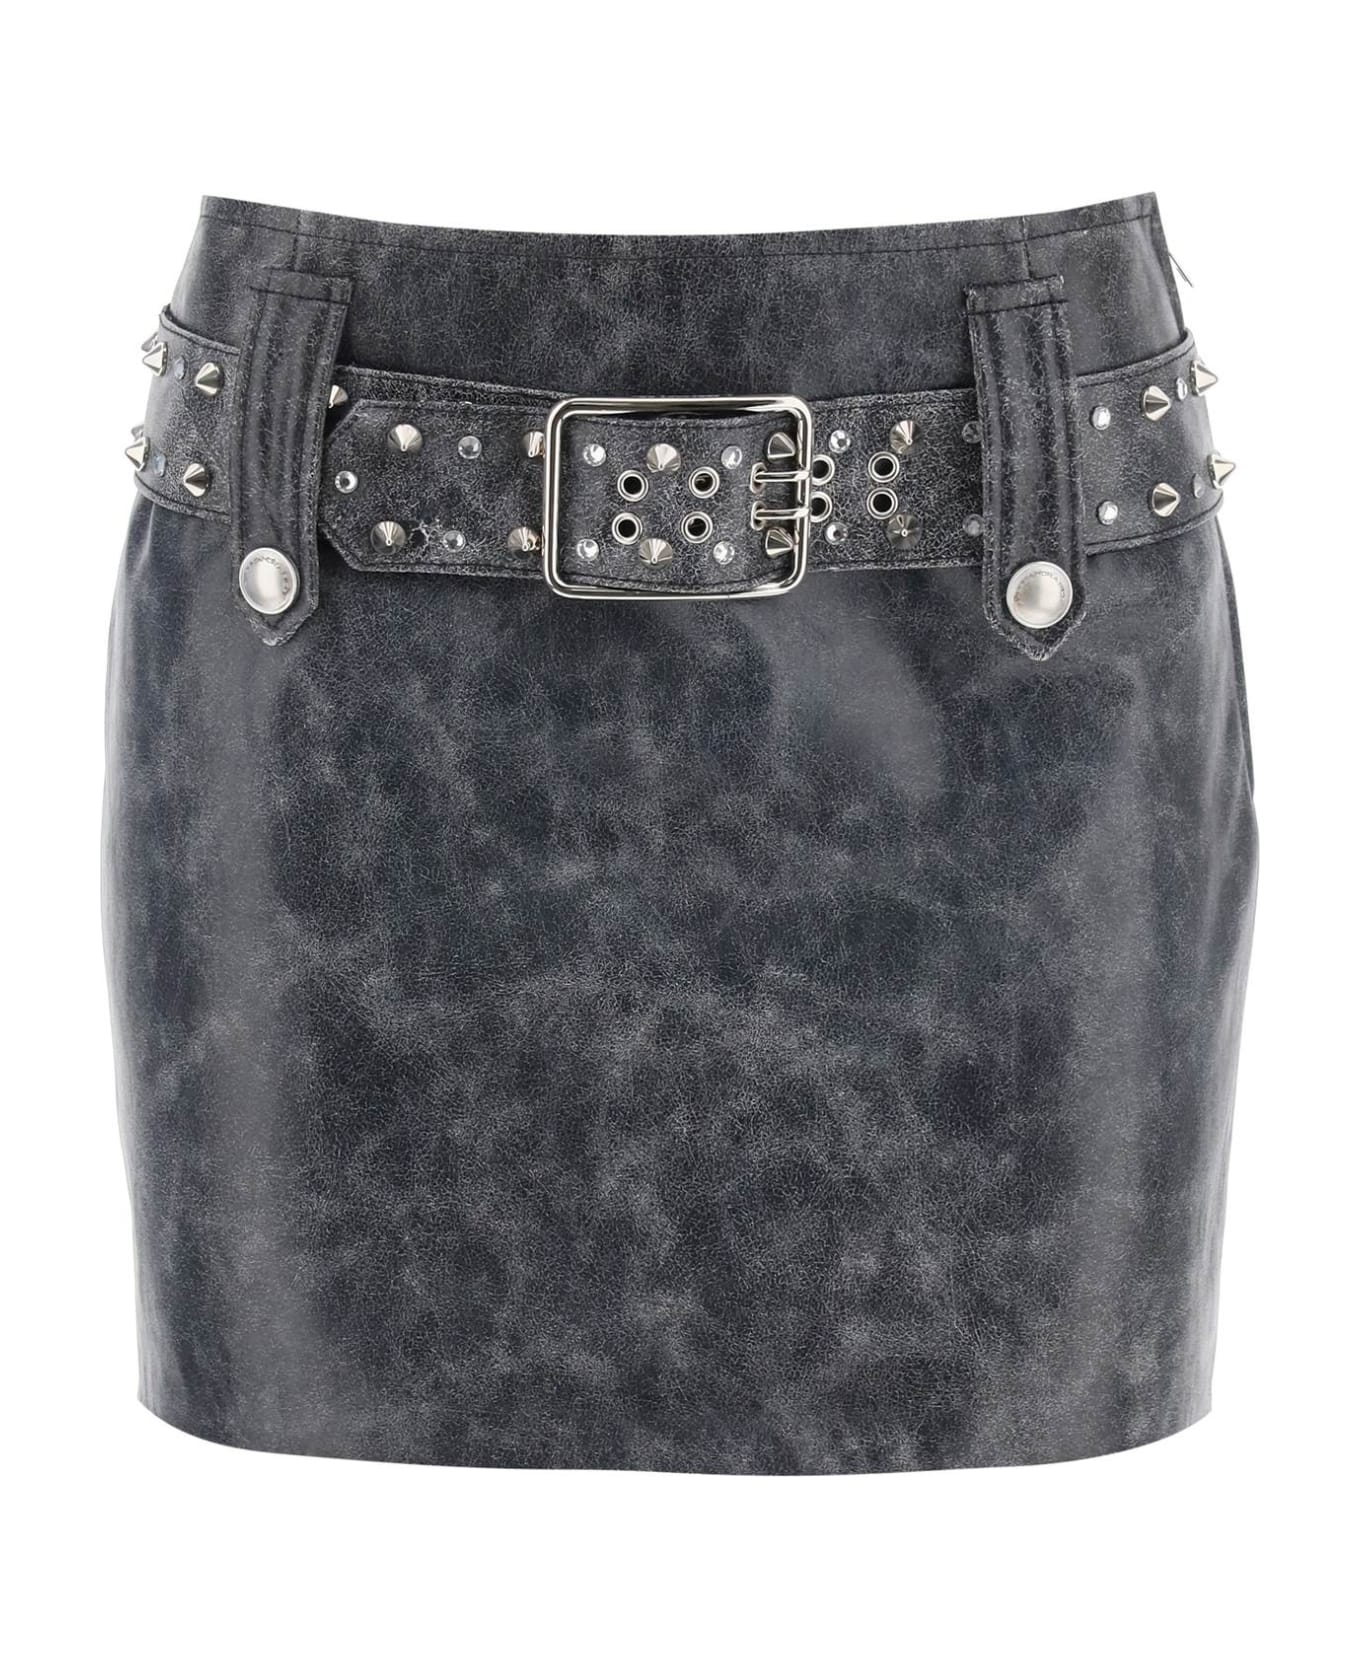 Alessandra Rich Leather Mini Skirt With Belt And Appliques - DARK GREY (Grey)